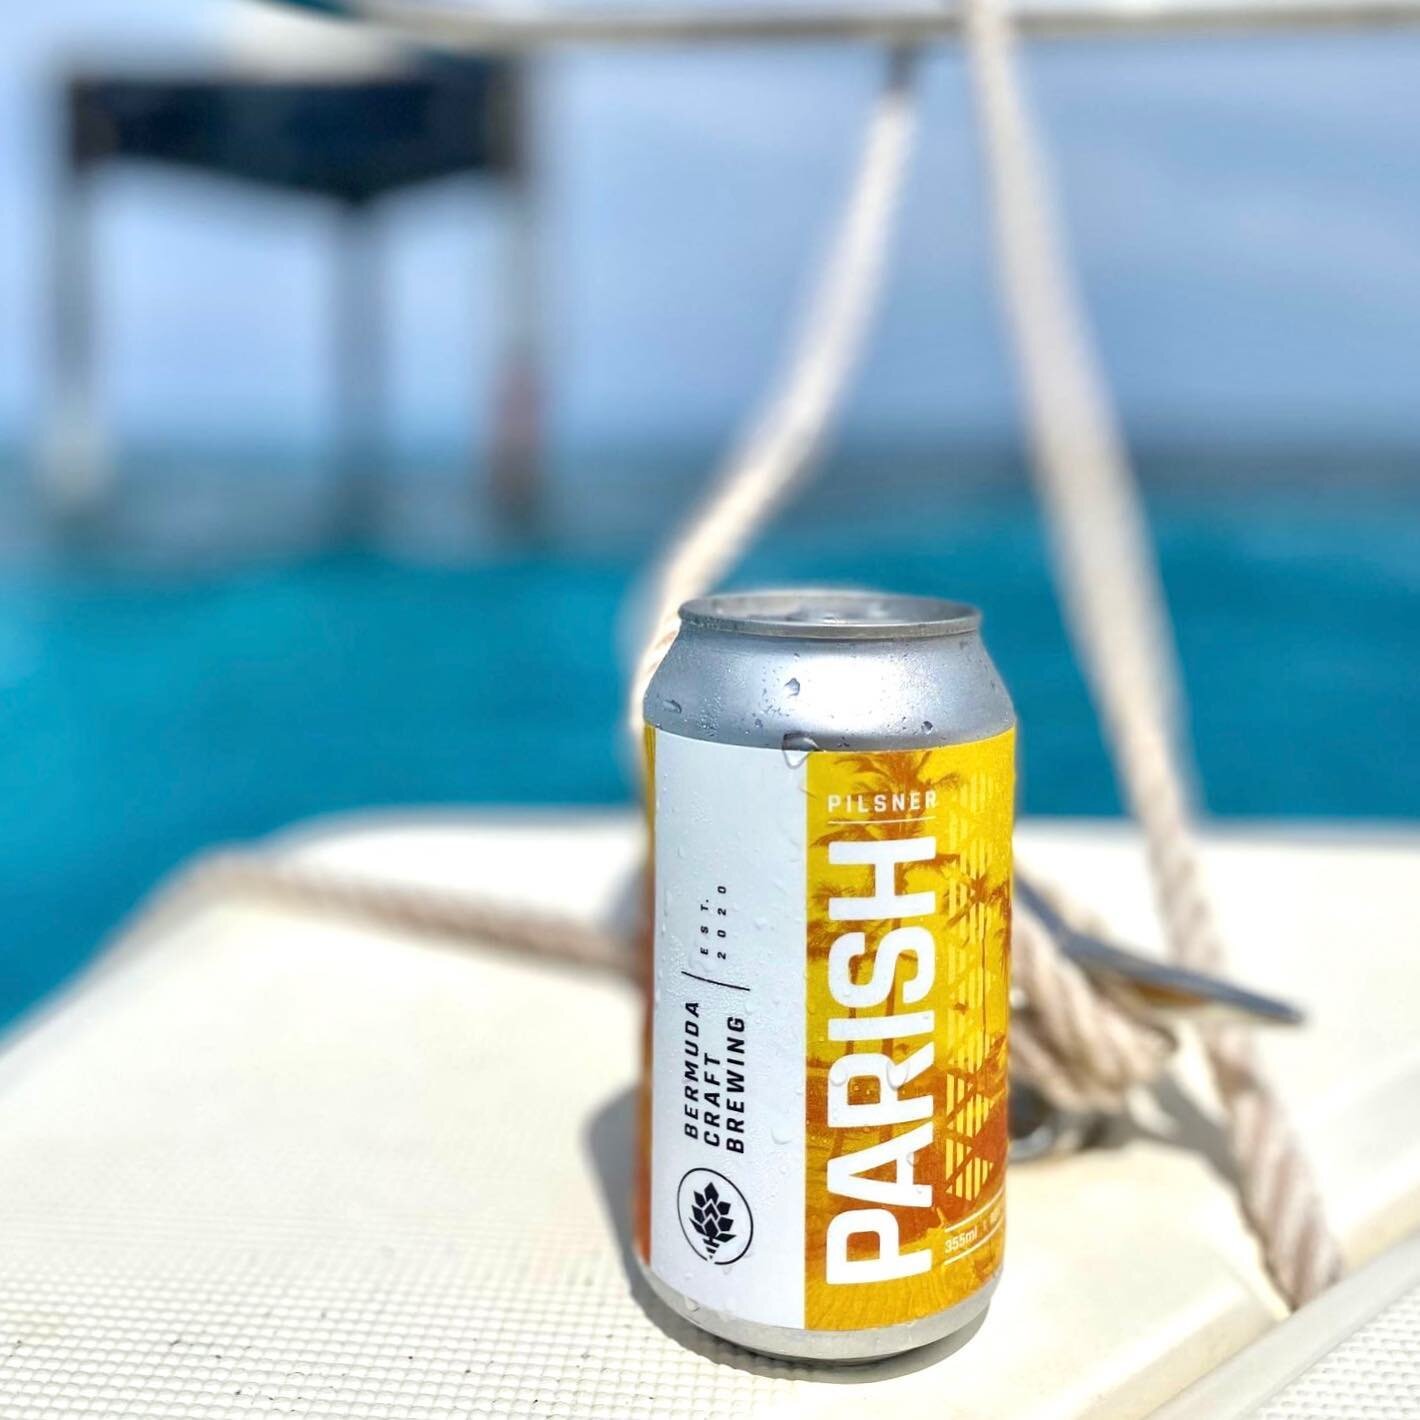 Hey, craft beer lovers! Have you met our Parish Pilsner yet? 
Maybe you&rsquo;ll feel a sense of Deja brew 😜the funny feeling you&rsquo;ve had this beer before? That&rsquo;s right! 

Our Octoberfest German Pilsner was so popular we are adding it the